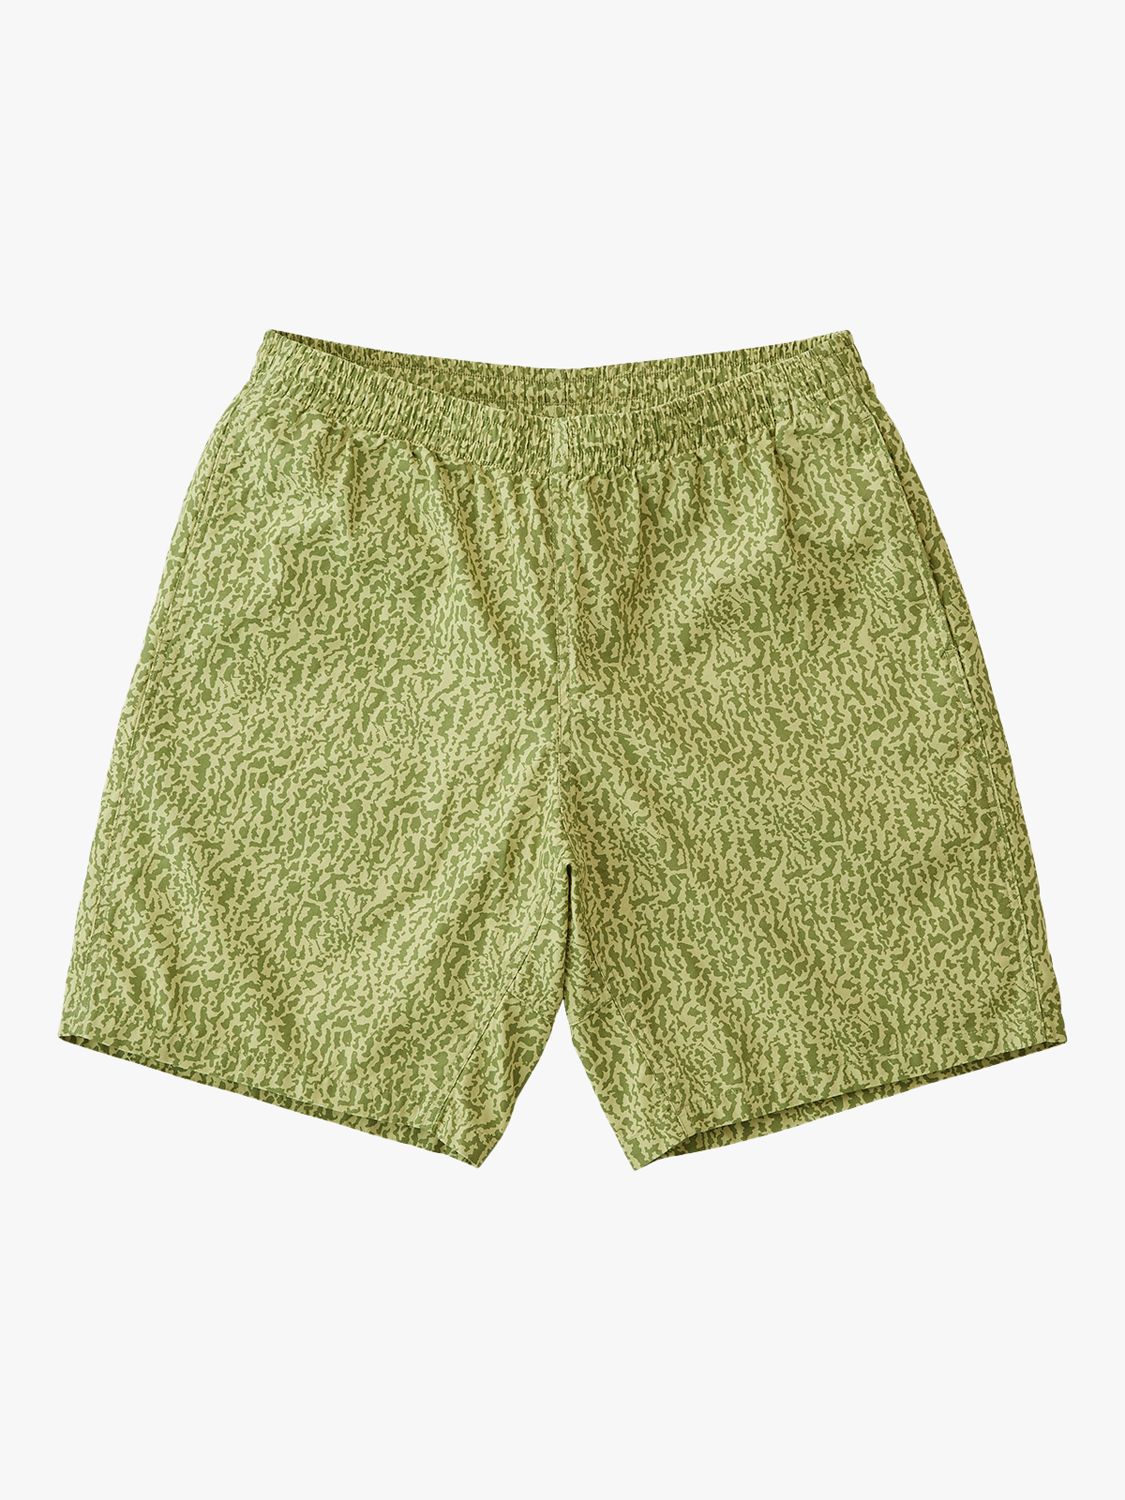 Gramicci Swell Patterned Shorts, Micro Bark, M